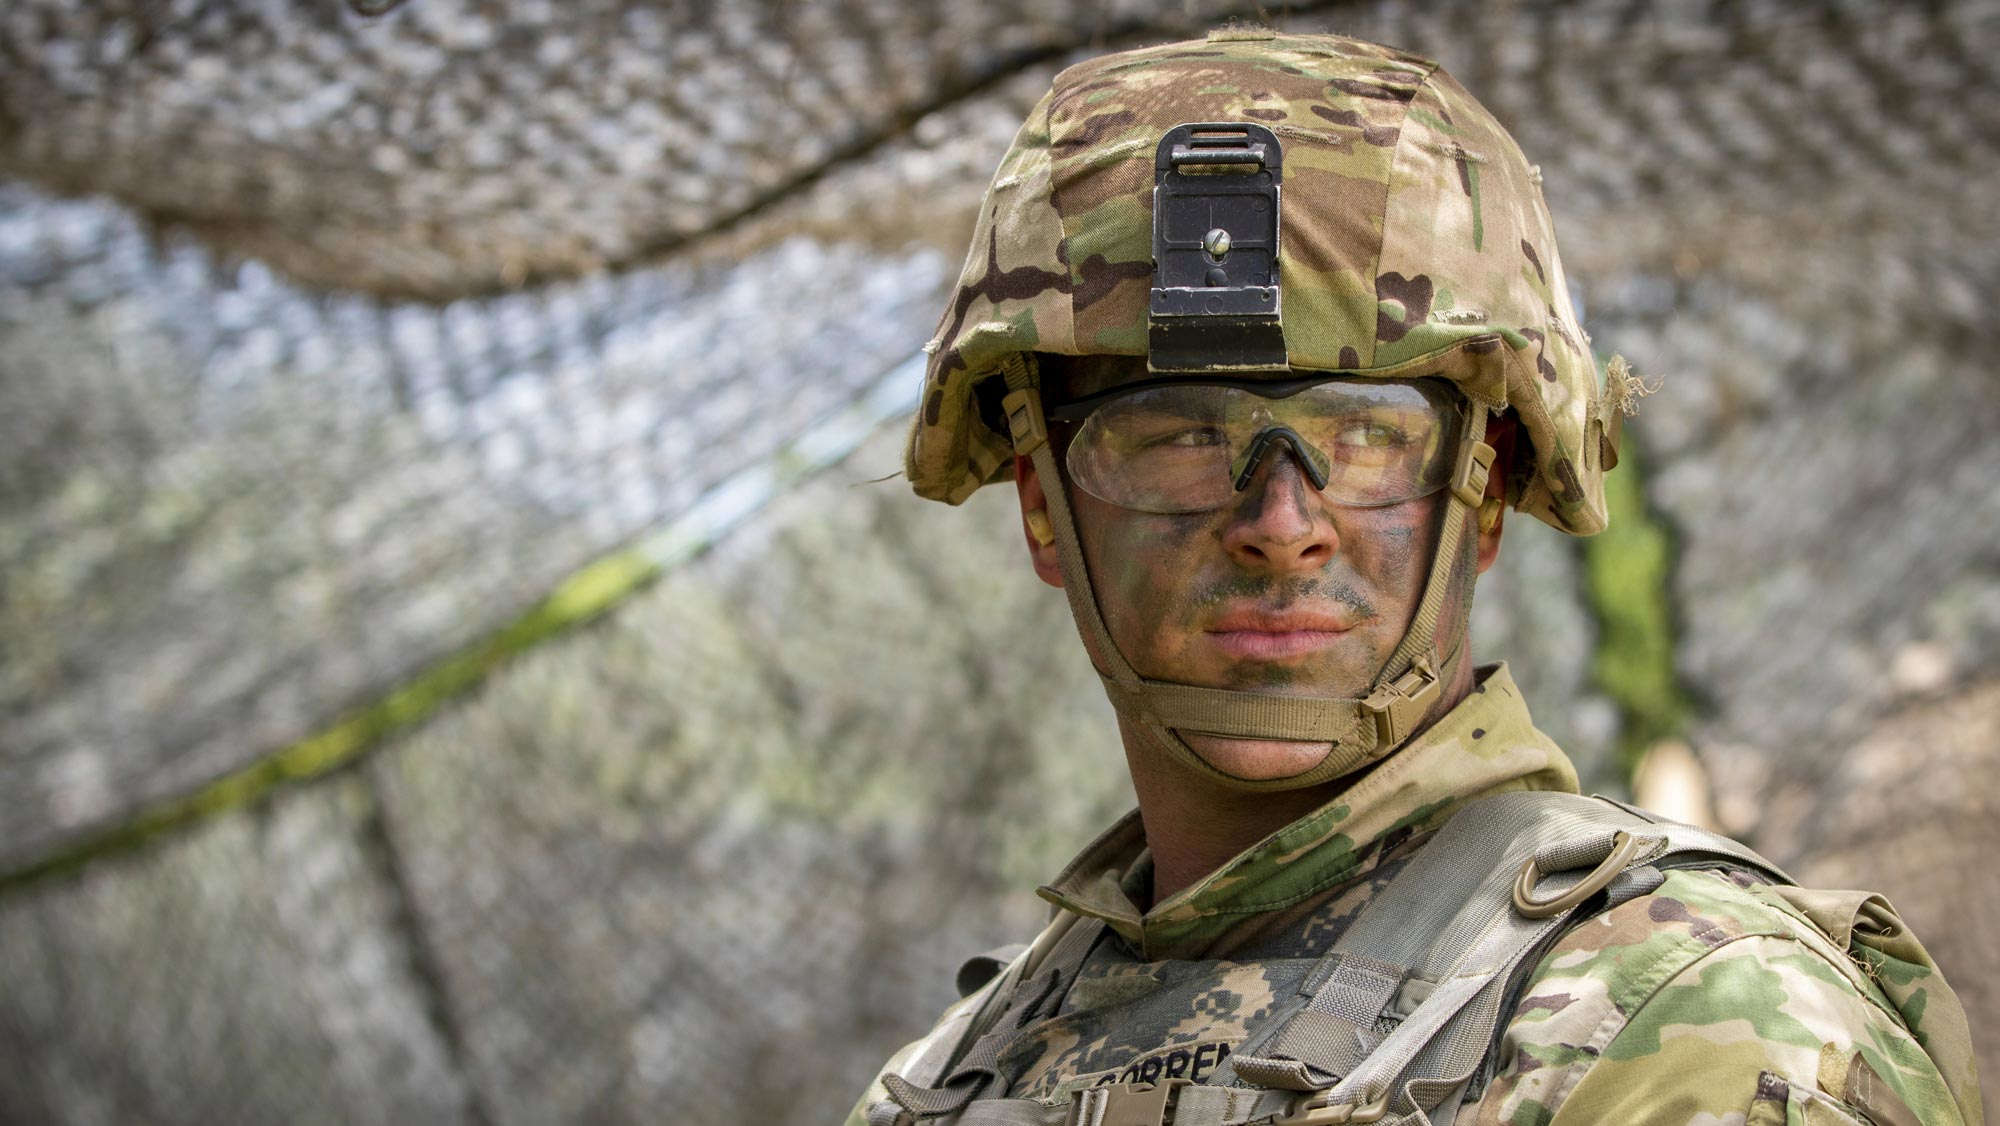 An army soldier wearing military safety gear, helmet, and goggles, with his face covered in camouflaging paint.